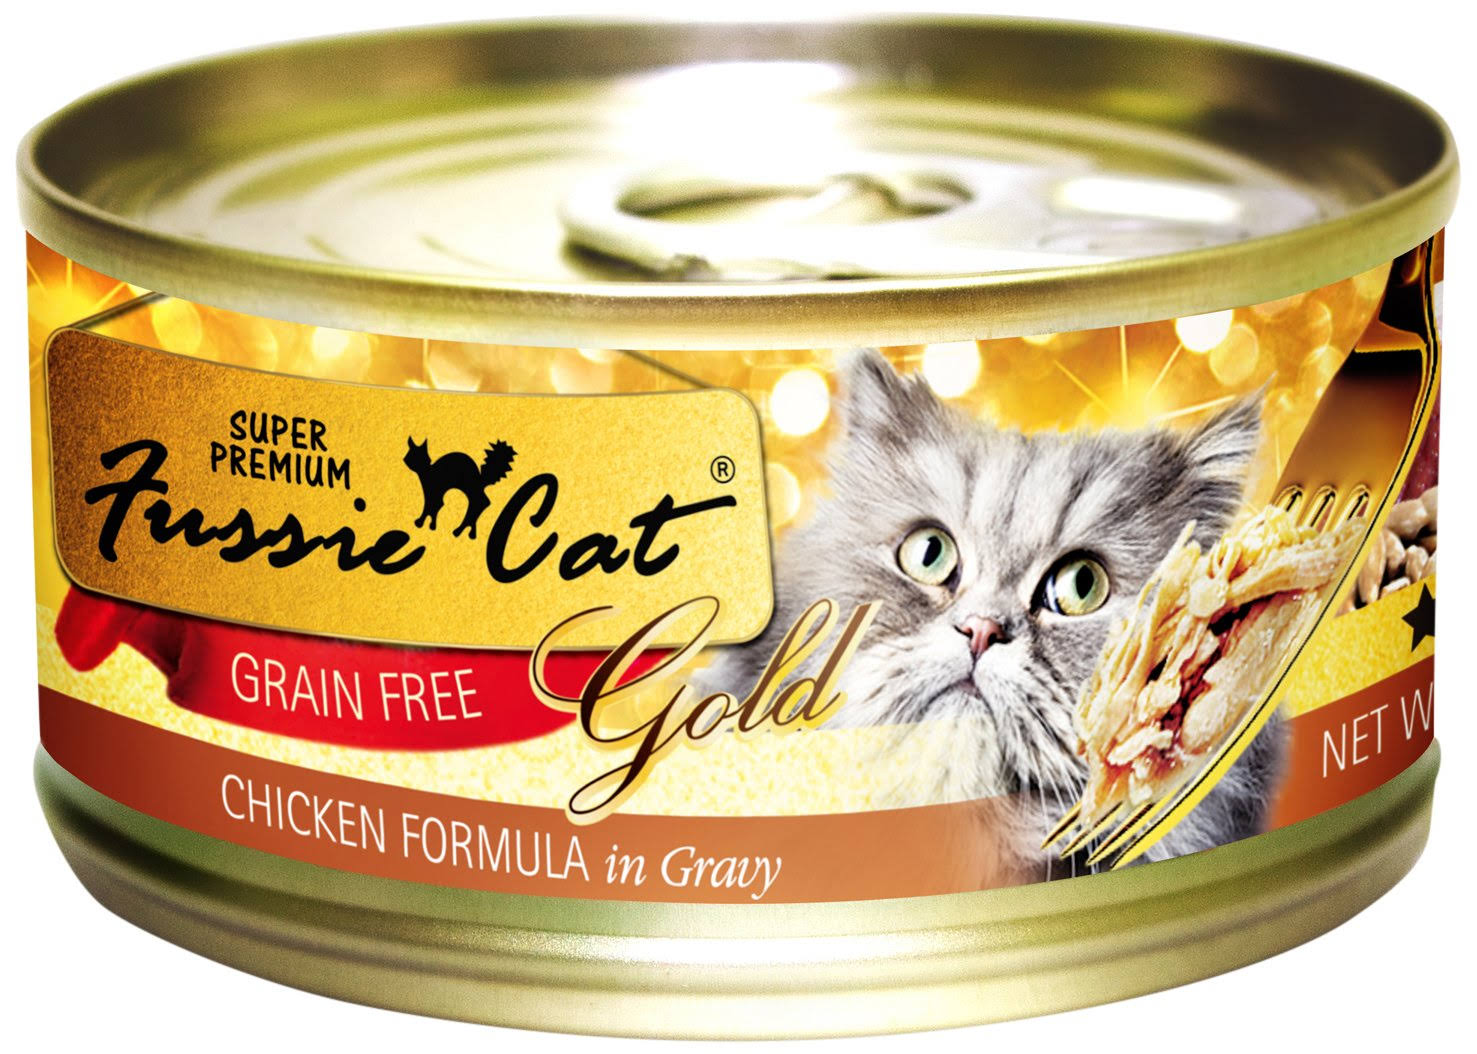 Fussie Cat Gold Chicken Formula in Gravy Grain-Free Canned Cat Food